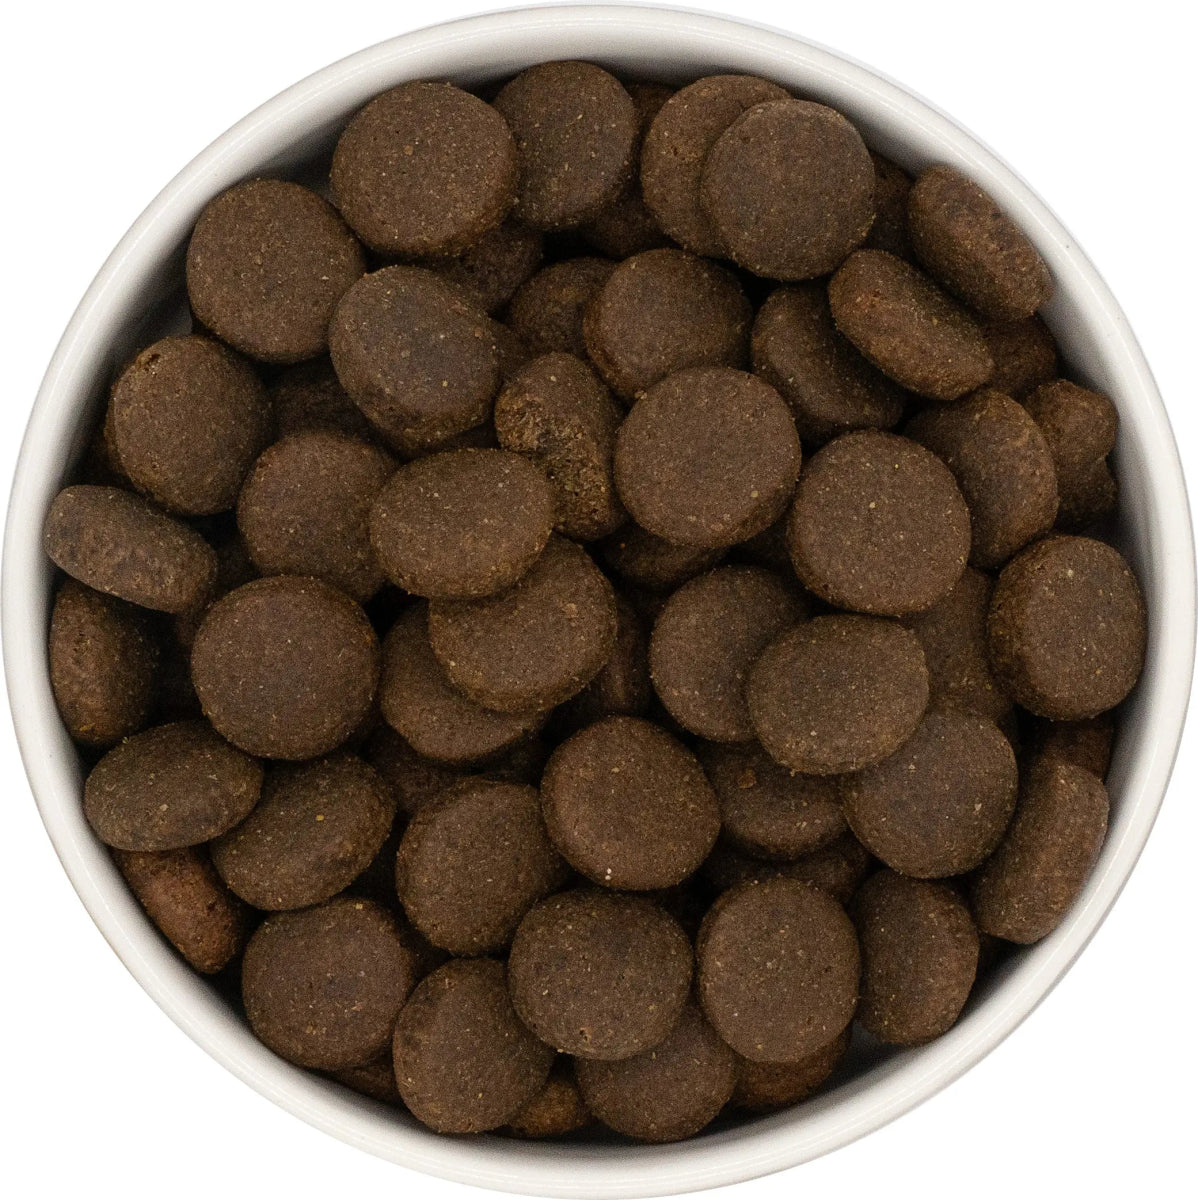 Grain Free Large Breed Dog Food - Turkey with Sweet Potato & Cranberry - Kibble UK - My Online Pet Store